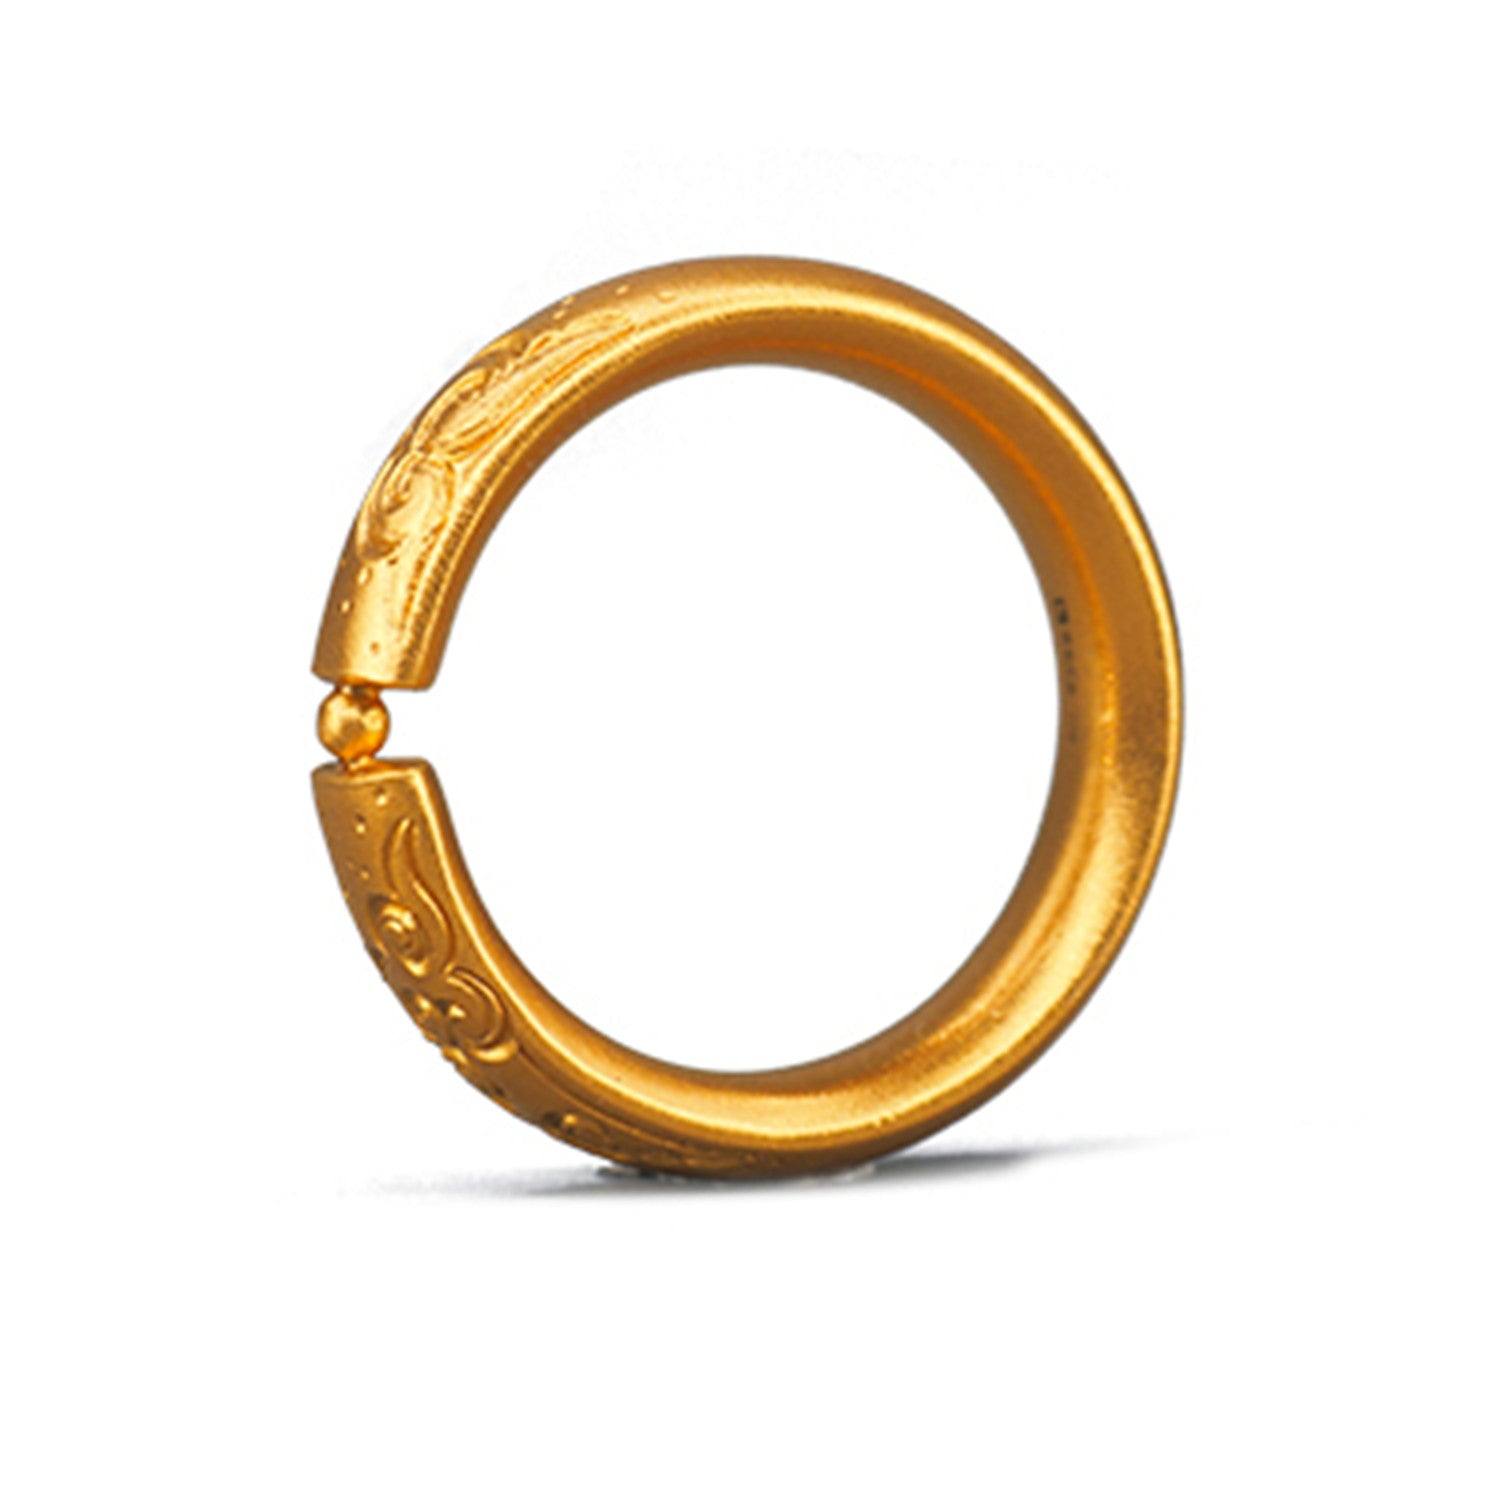 EVECOCO Full Gold Ring Hand Forging With Cloud Pattern,6mm Wide